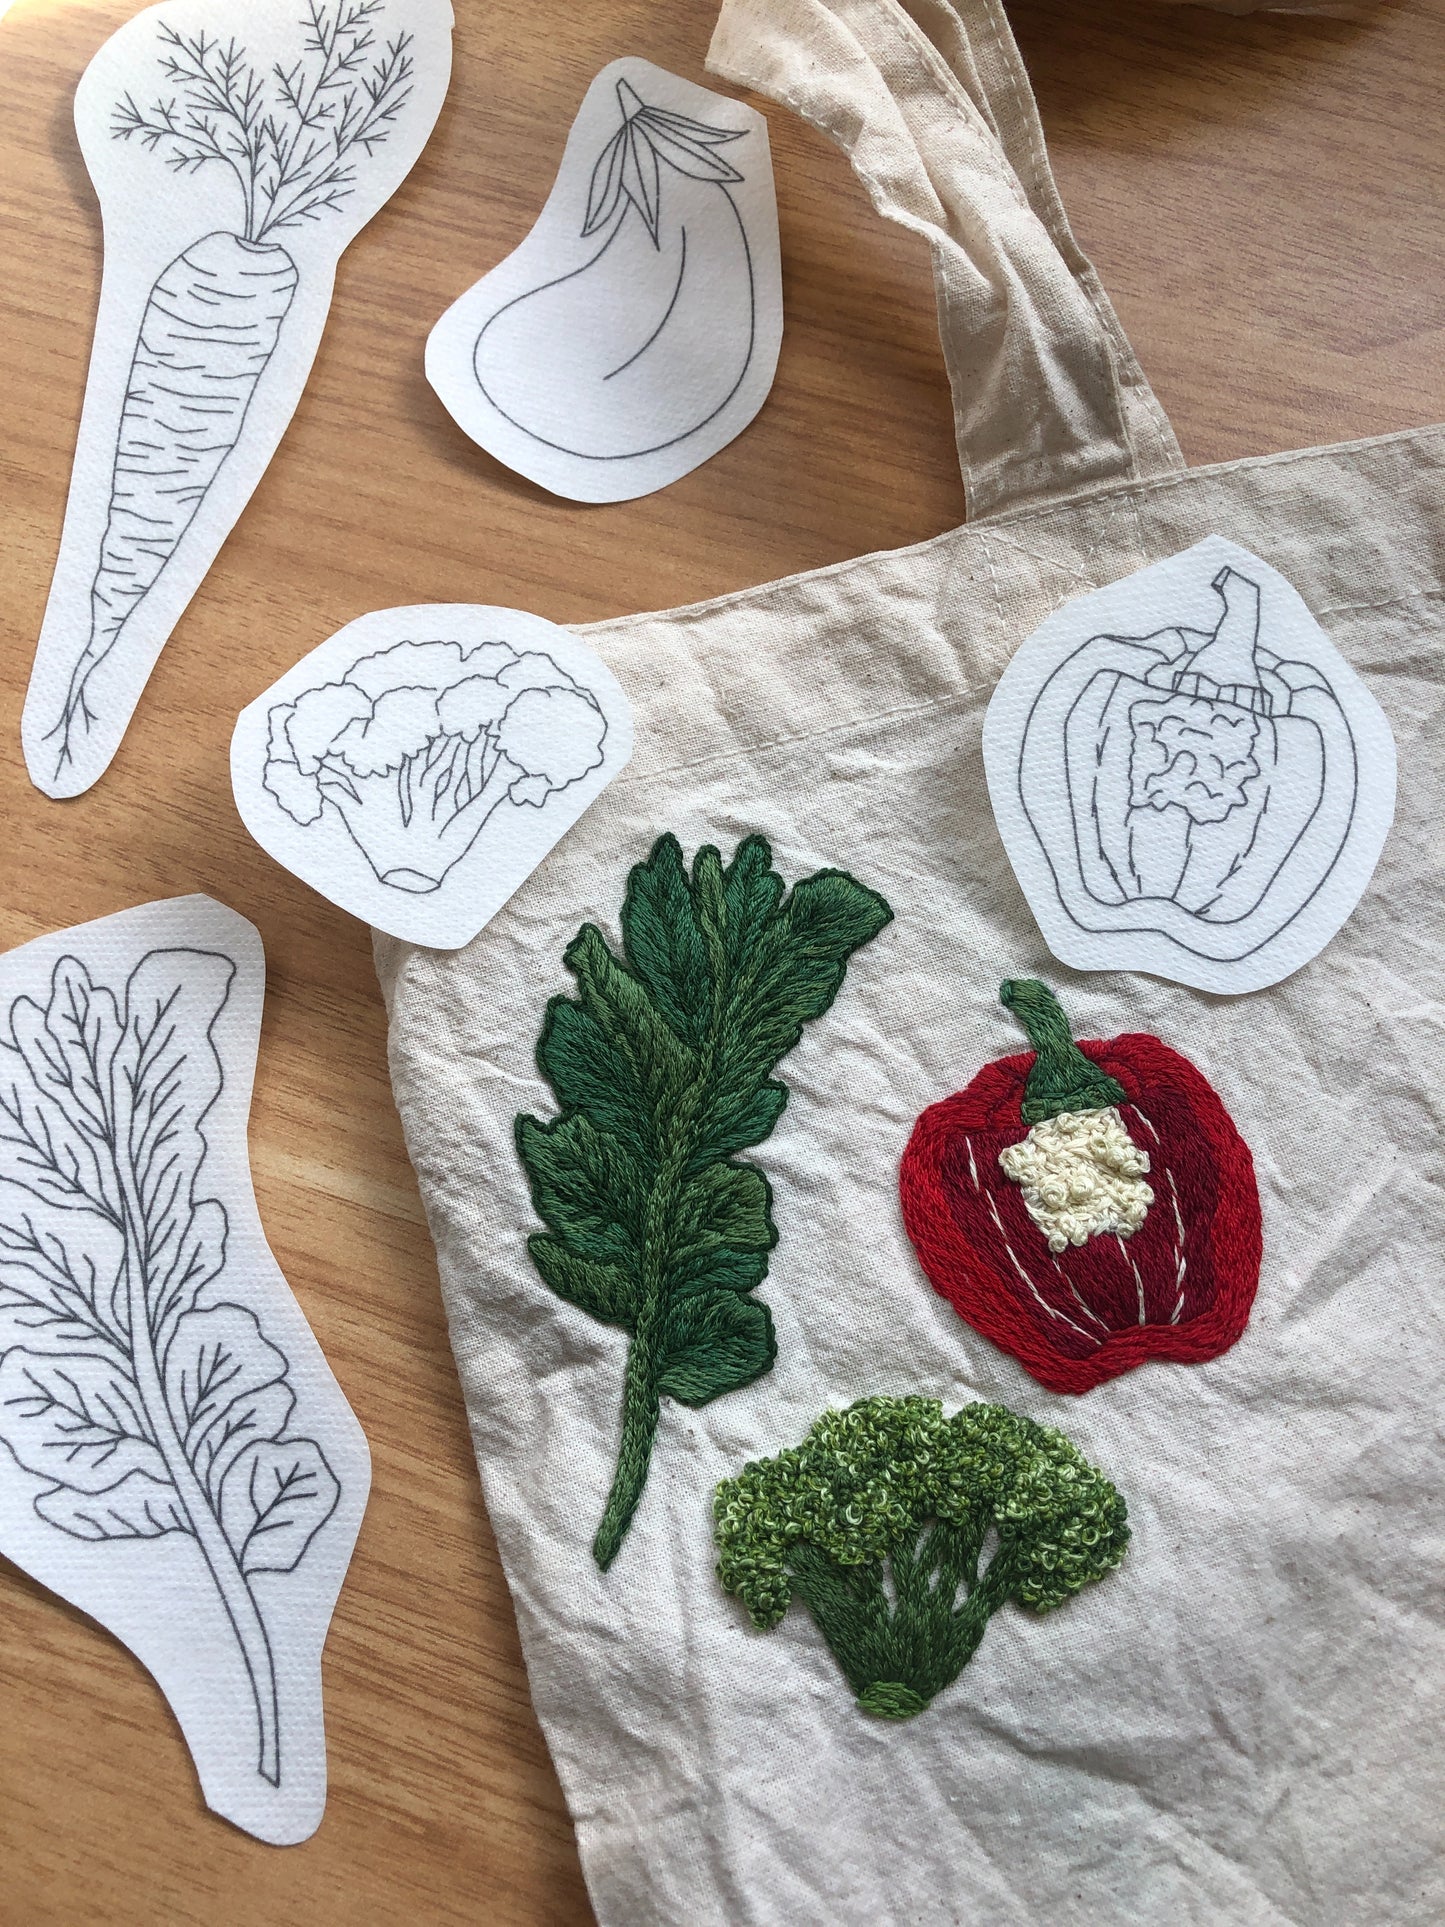 WORKSHOP: 8/15 Upcycle Your Tote Bag with Veggie Embroidery